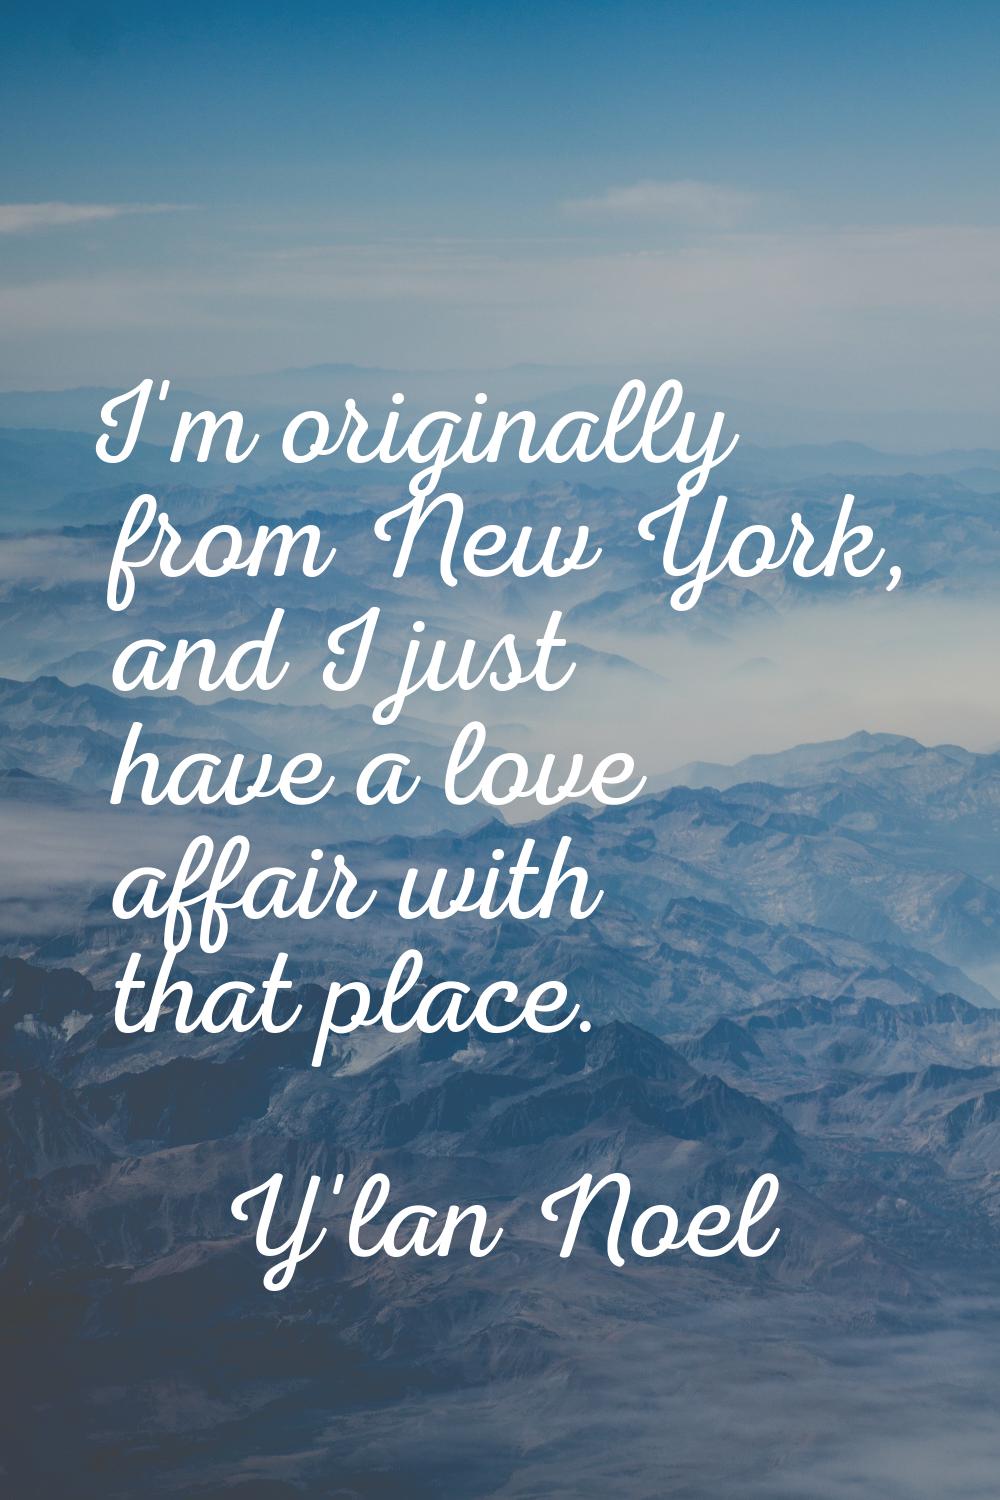 I'm originally from New York, and I just have a love affair with that place.